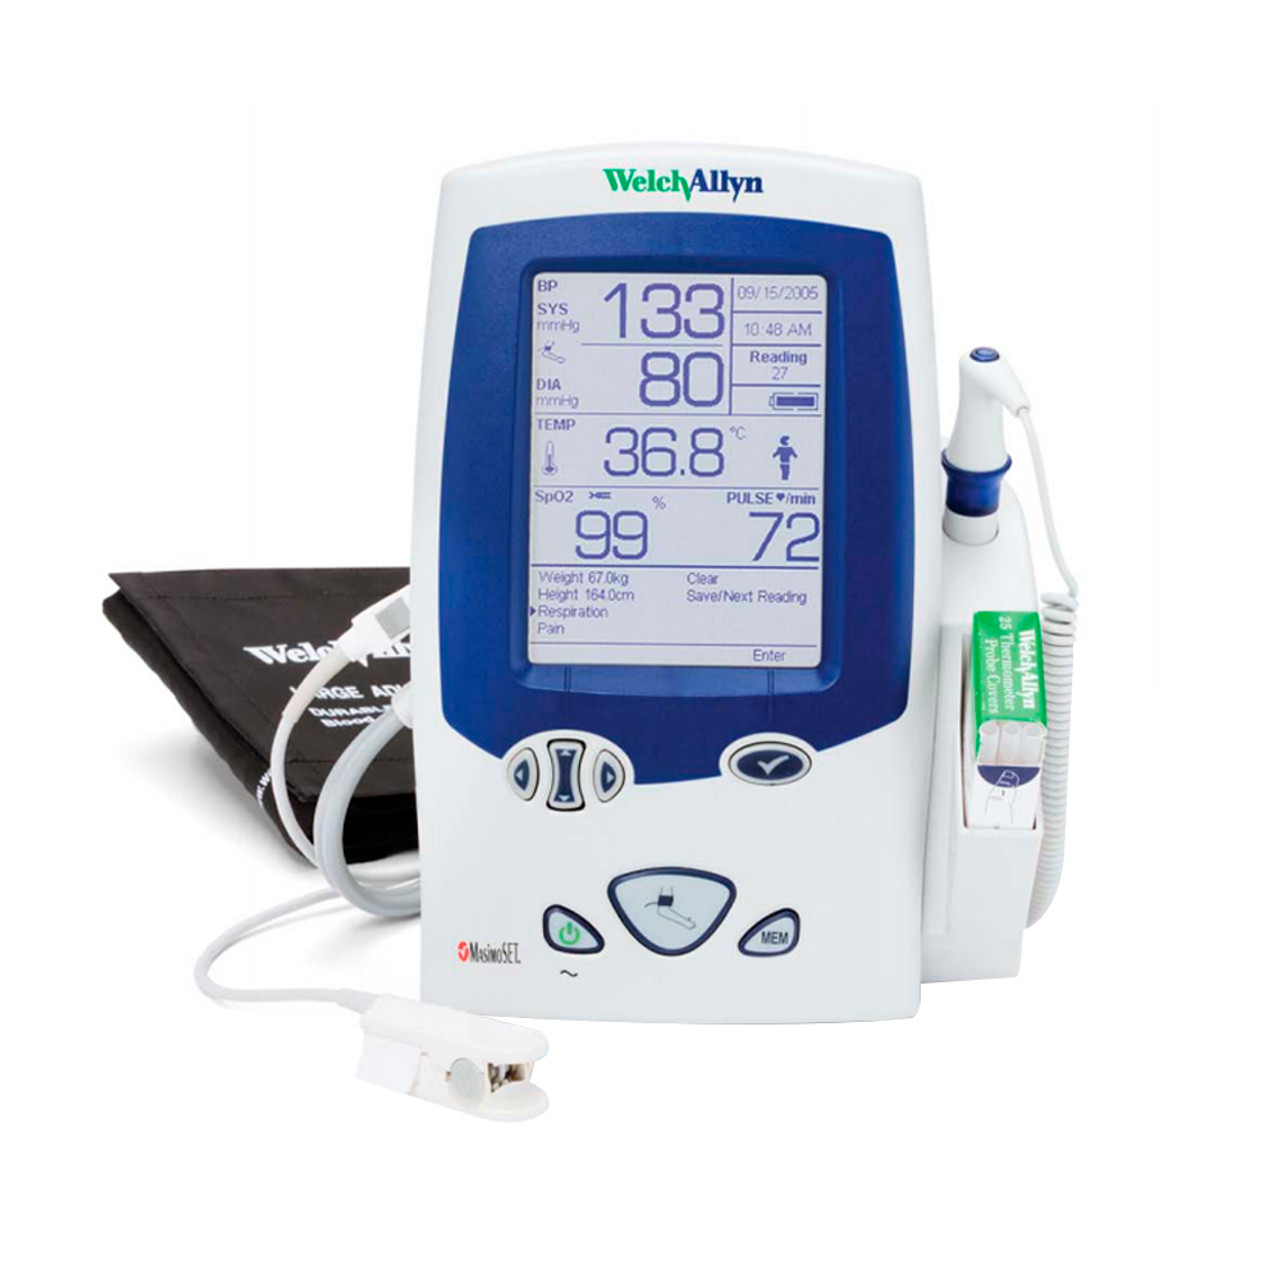 Welch Allyn Spot LXi Vital Signs Monitor - SakoMed Biomedical Services